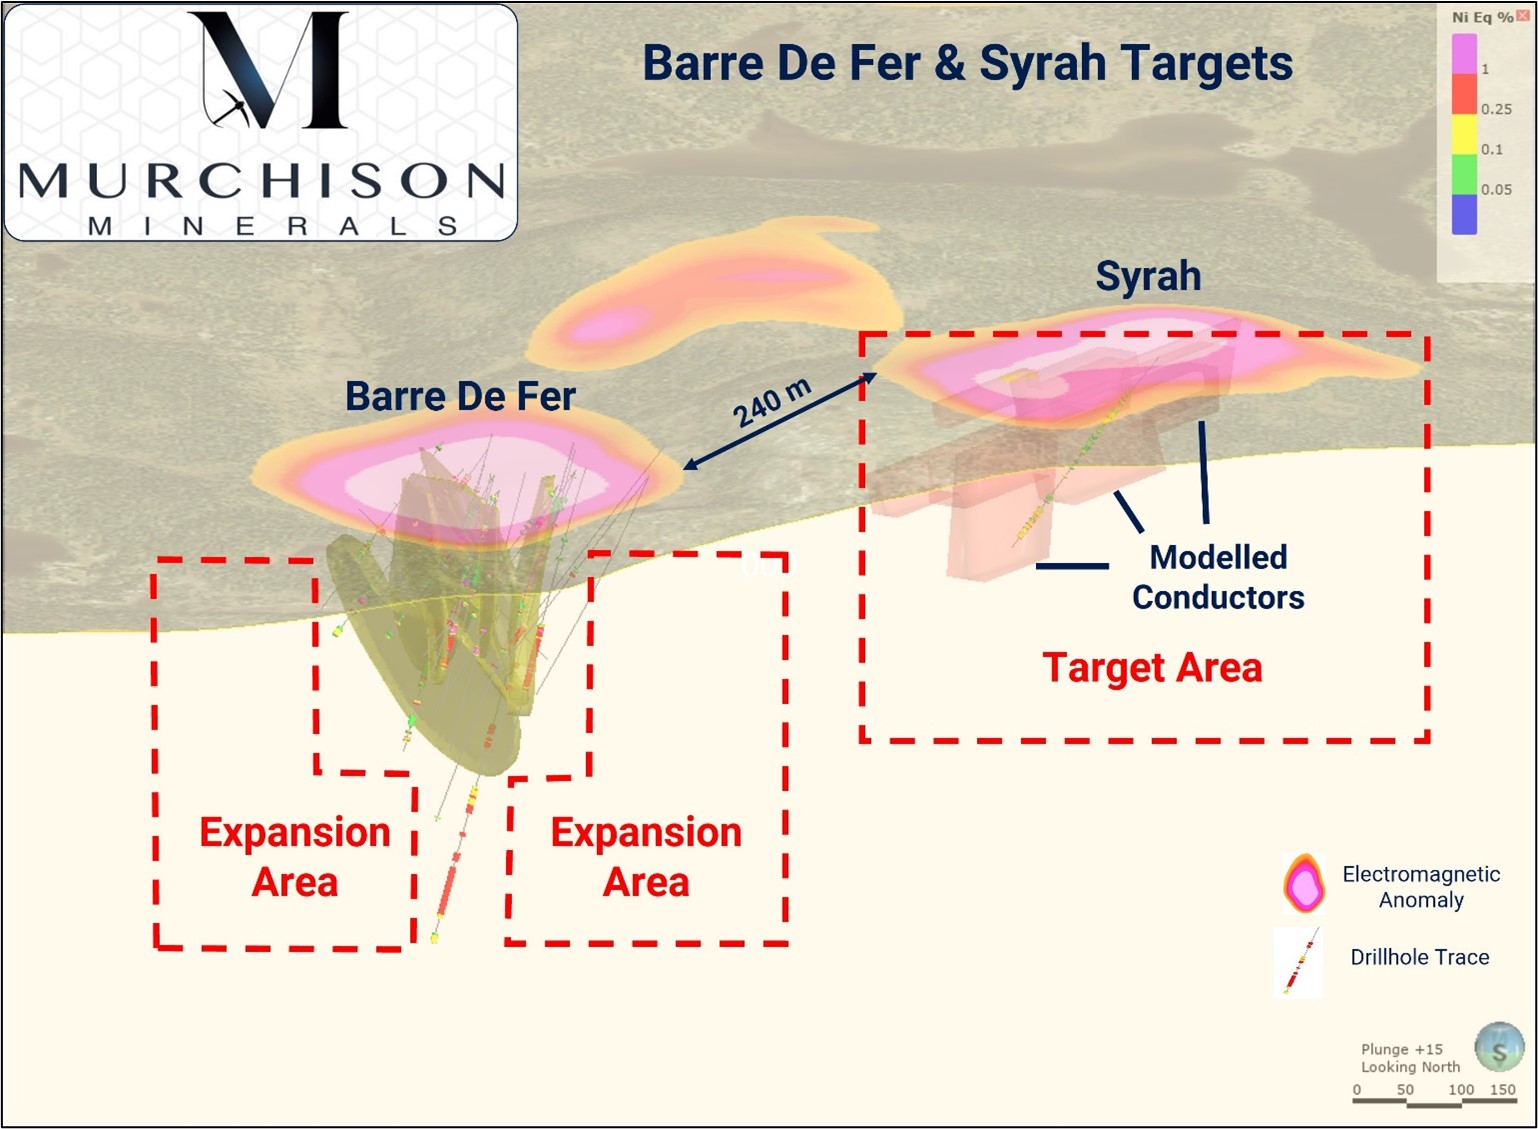 Murchison Minerals BFD and Syrah Targets